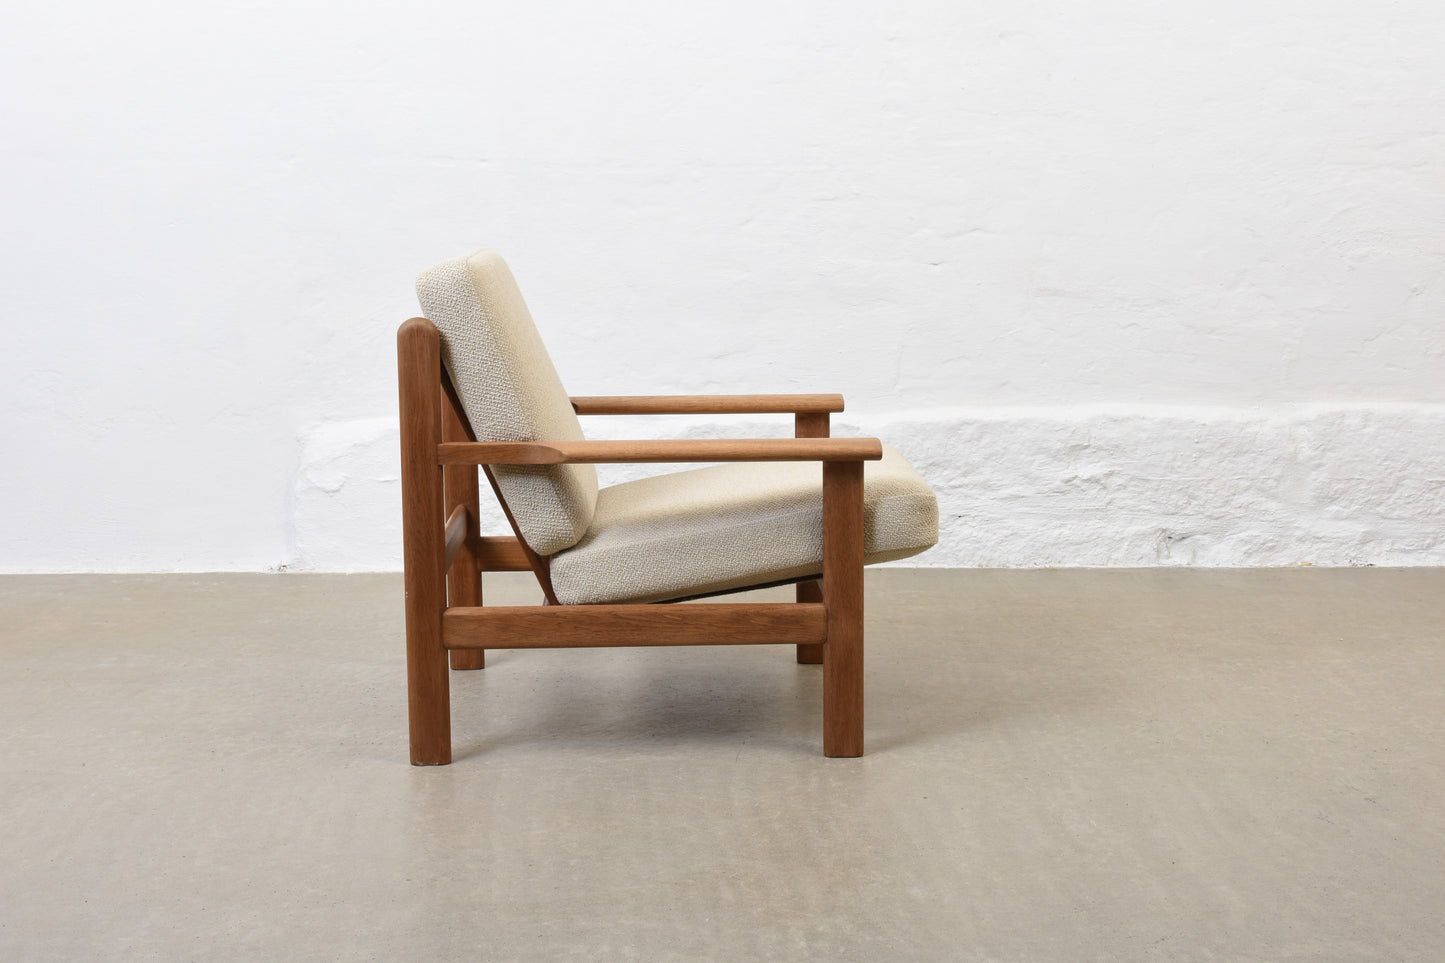 Newly reupholstered: Model 390 lounger by Poul Volther